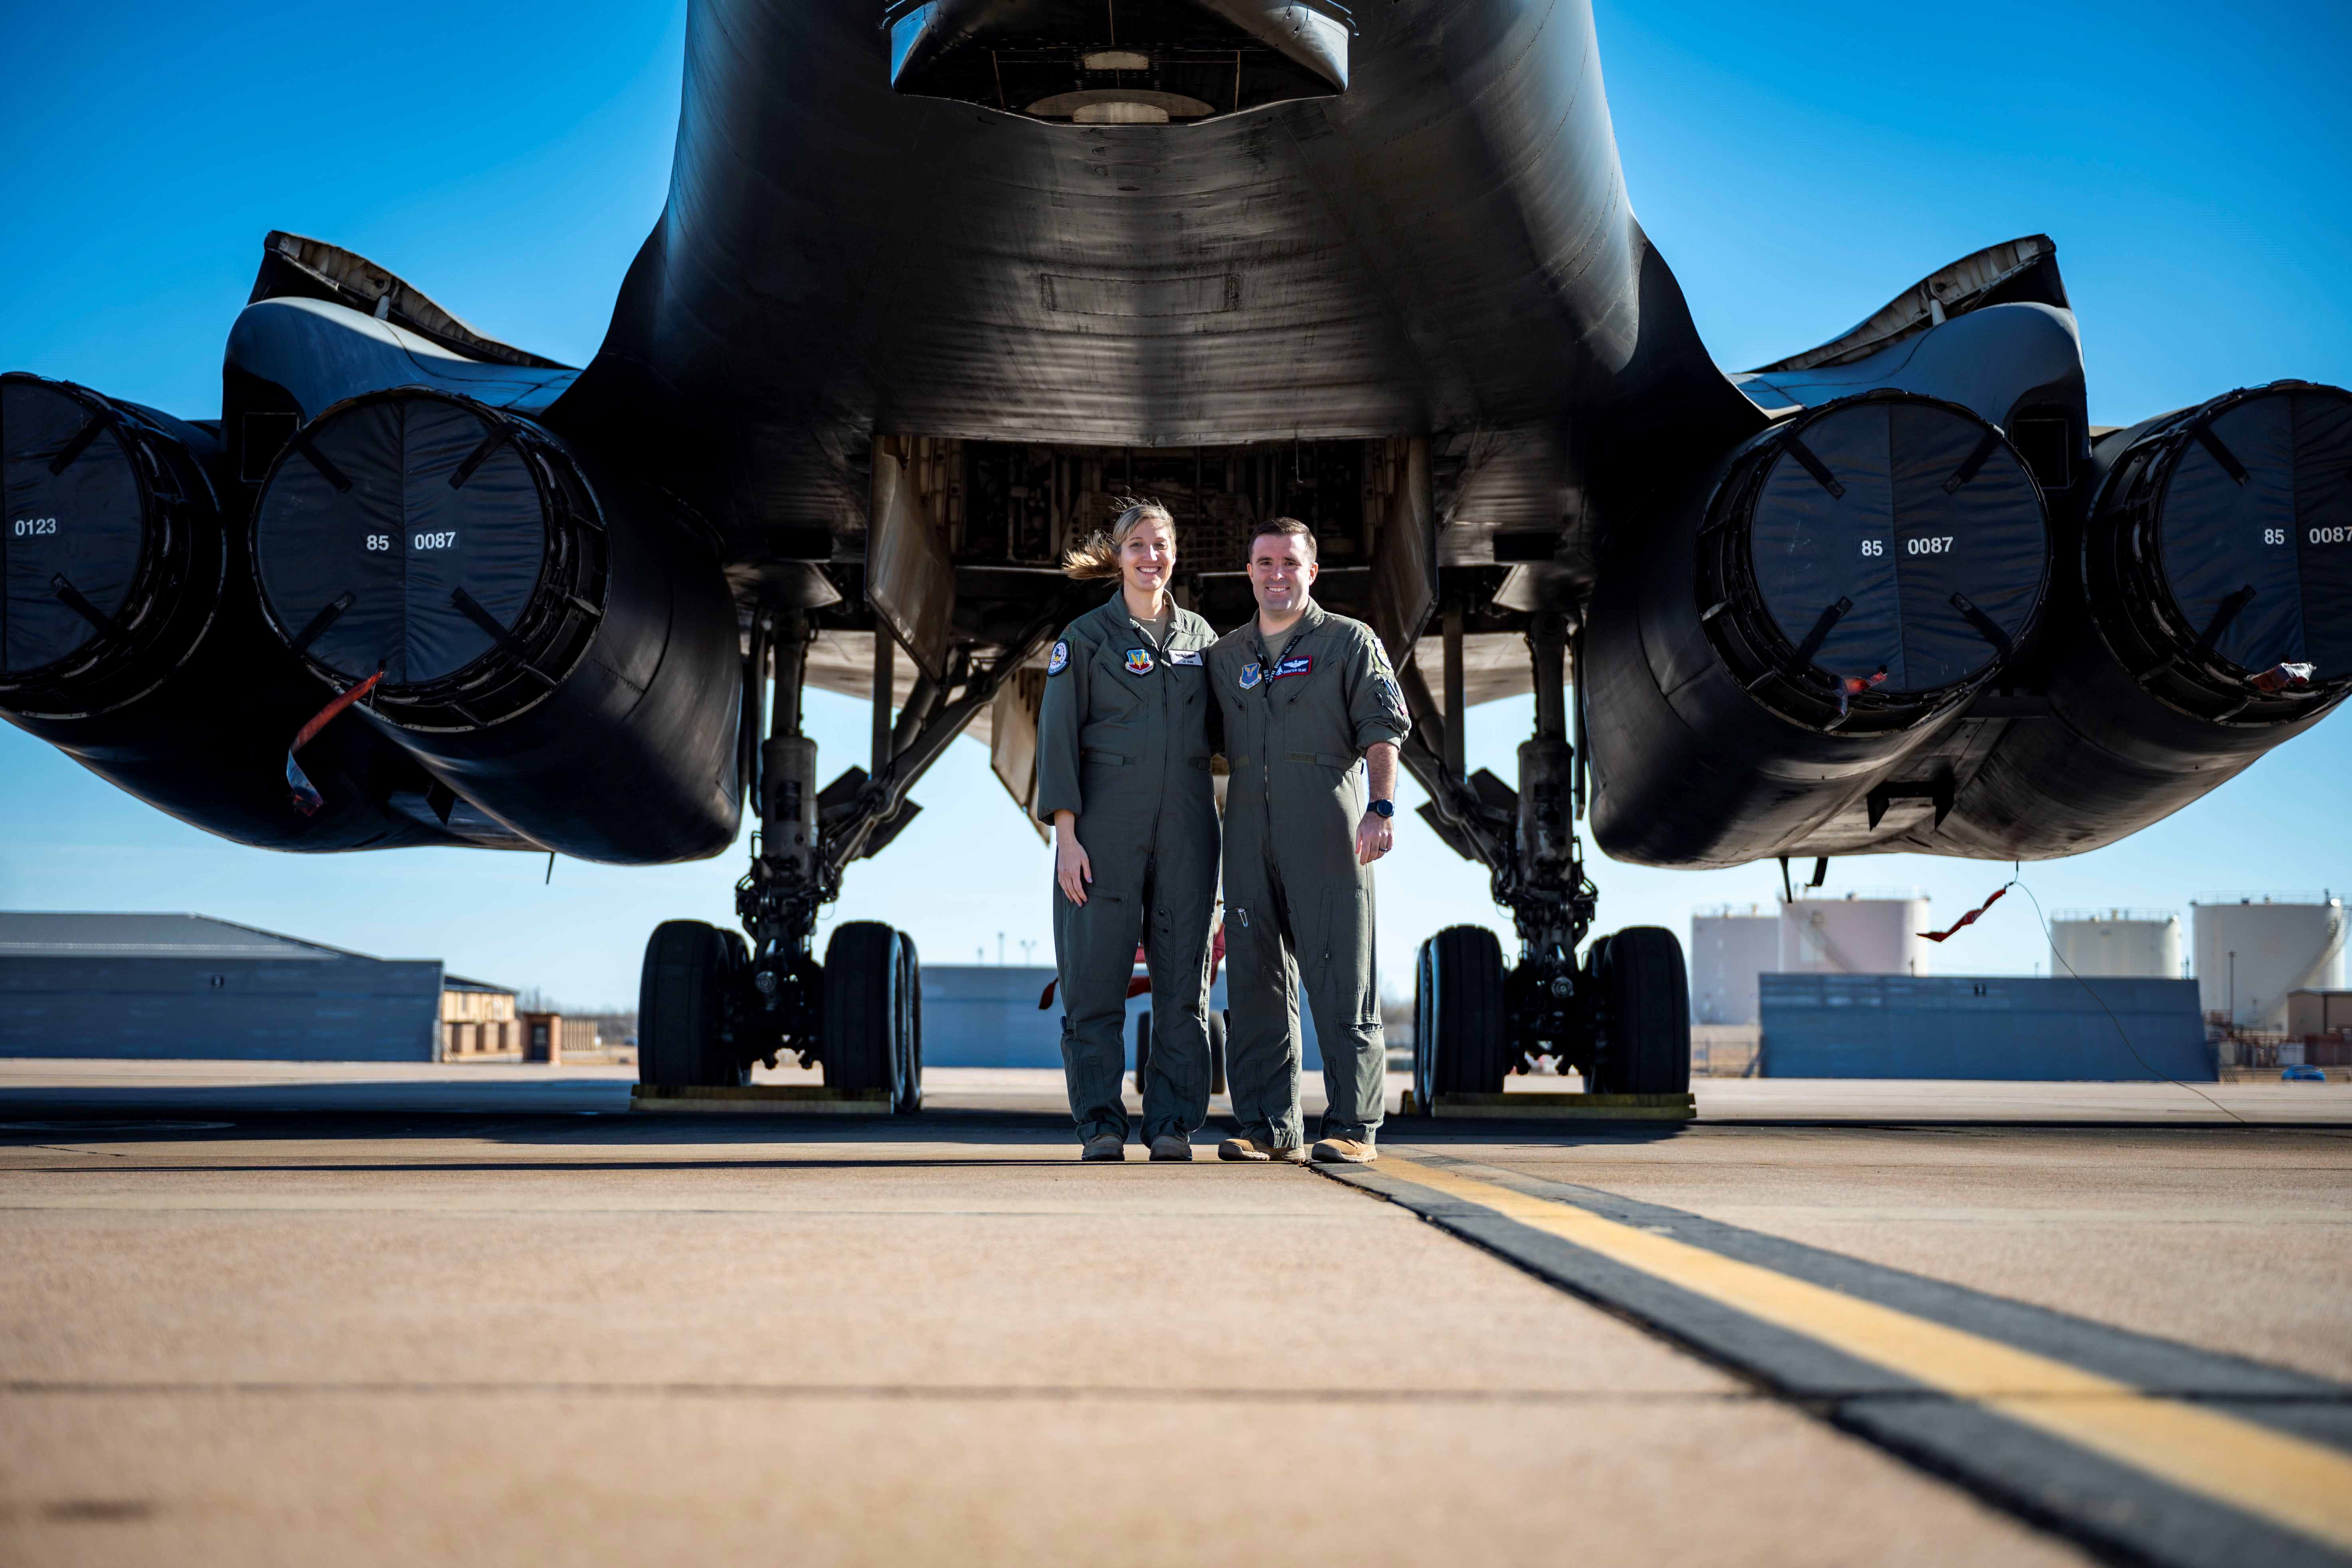 B-1 baby on board - Air Force pilot among First to fly Supersonic plane while pregnant .